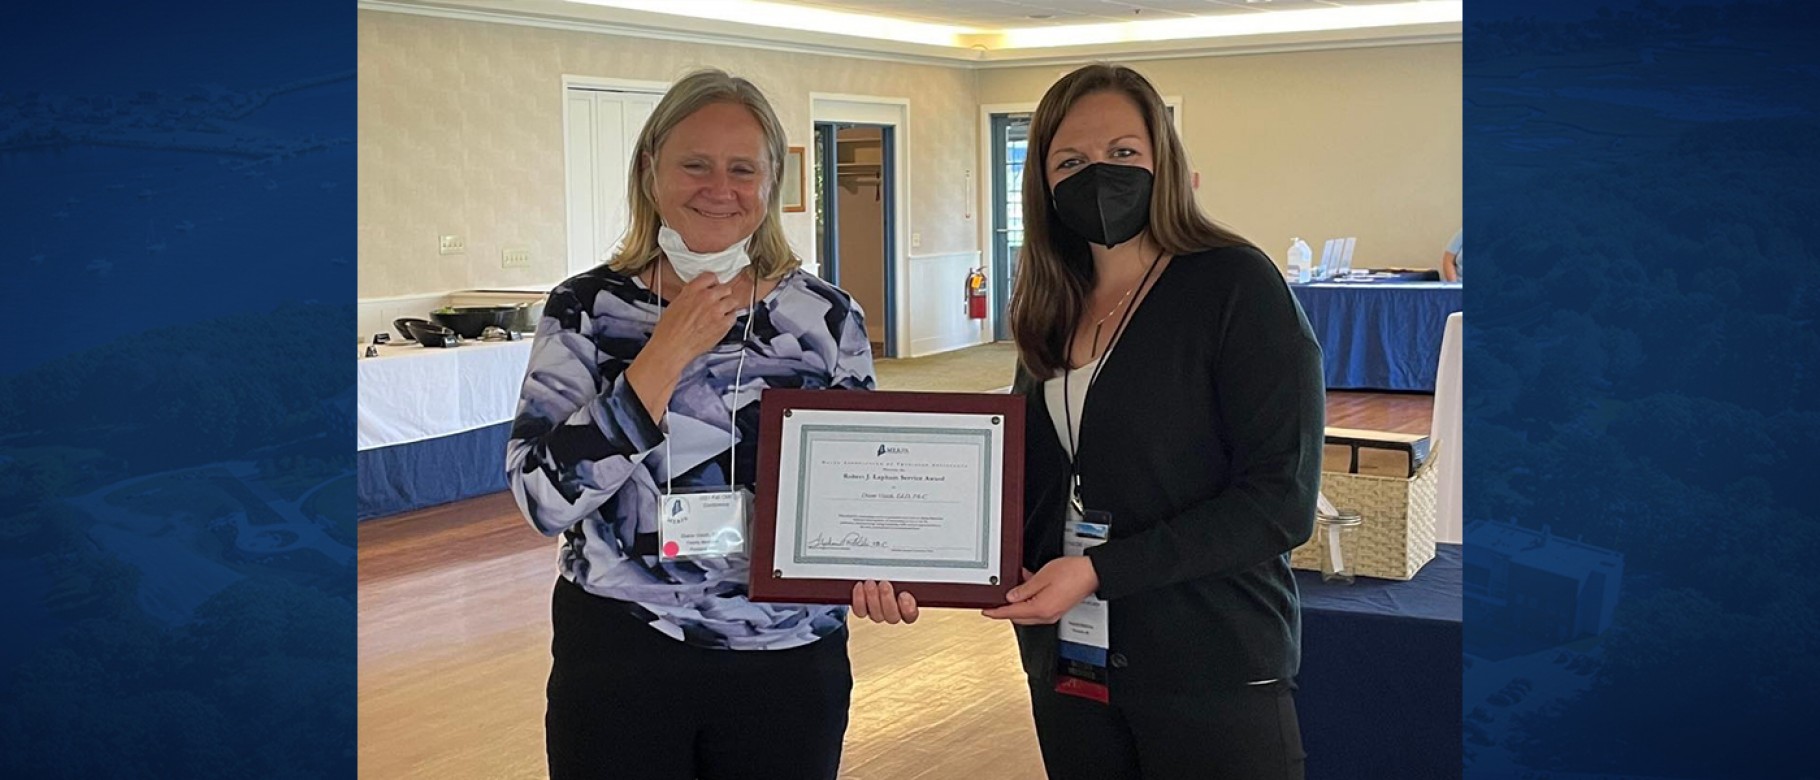 Diane Visich accepts an award from the Maine Academy of Physician Assistants